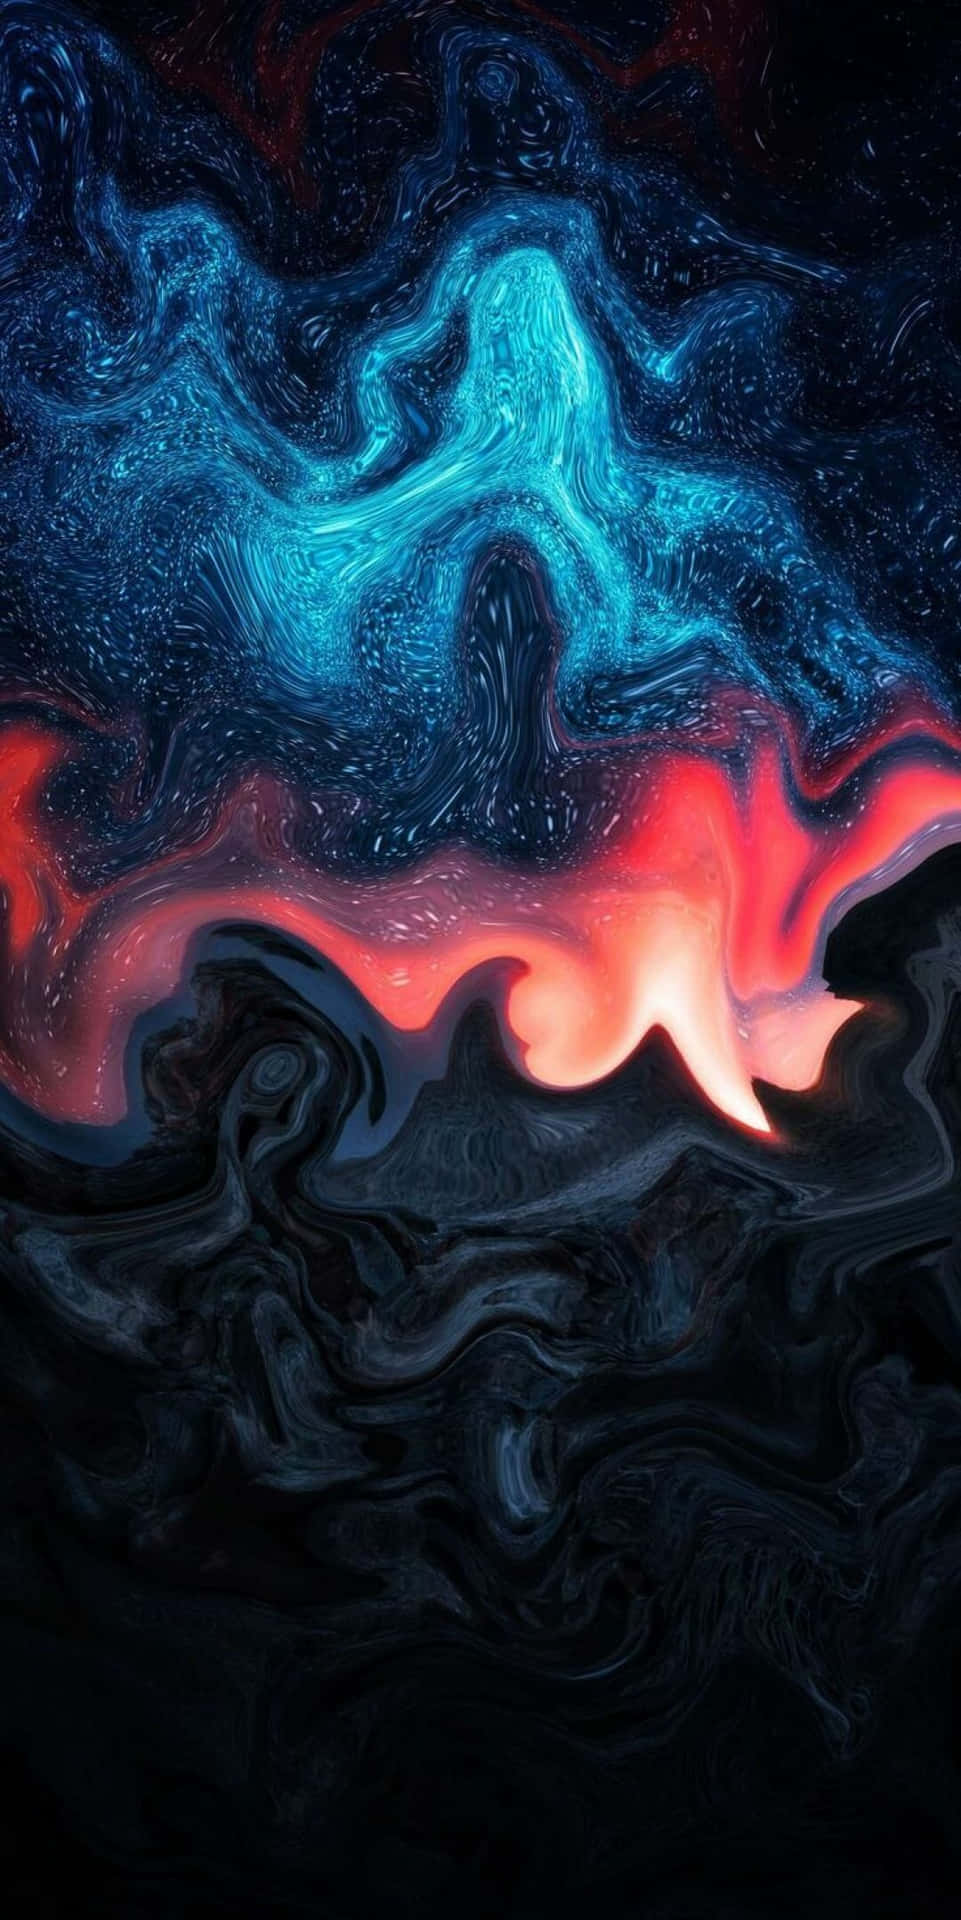 Colorful Iphone Wallpaper